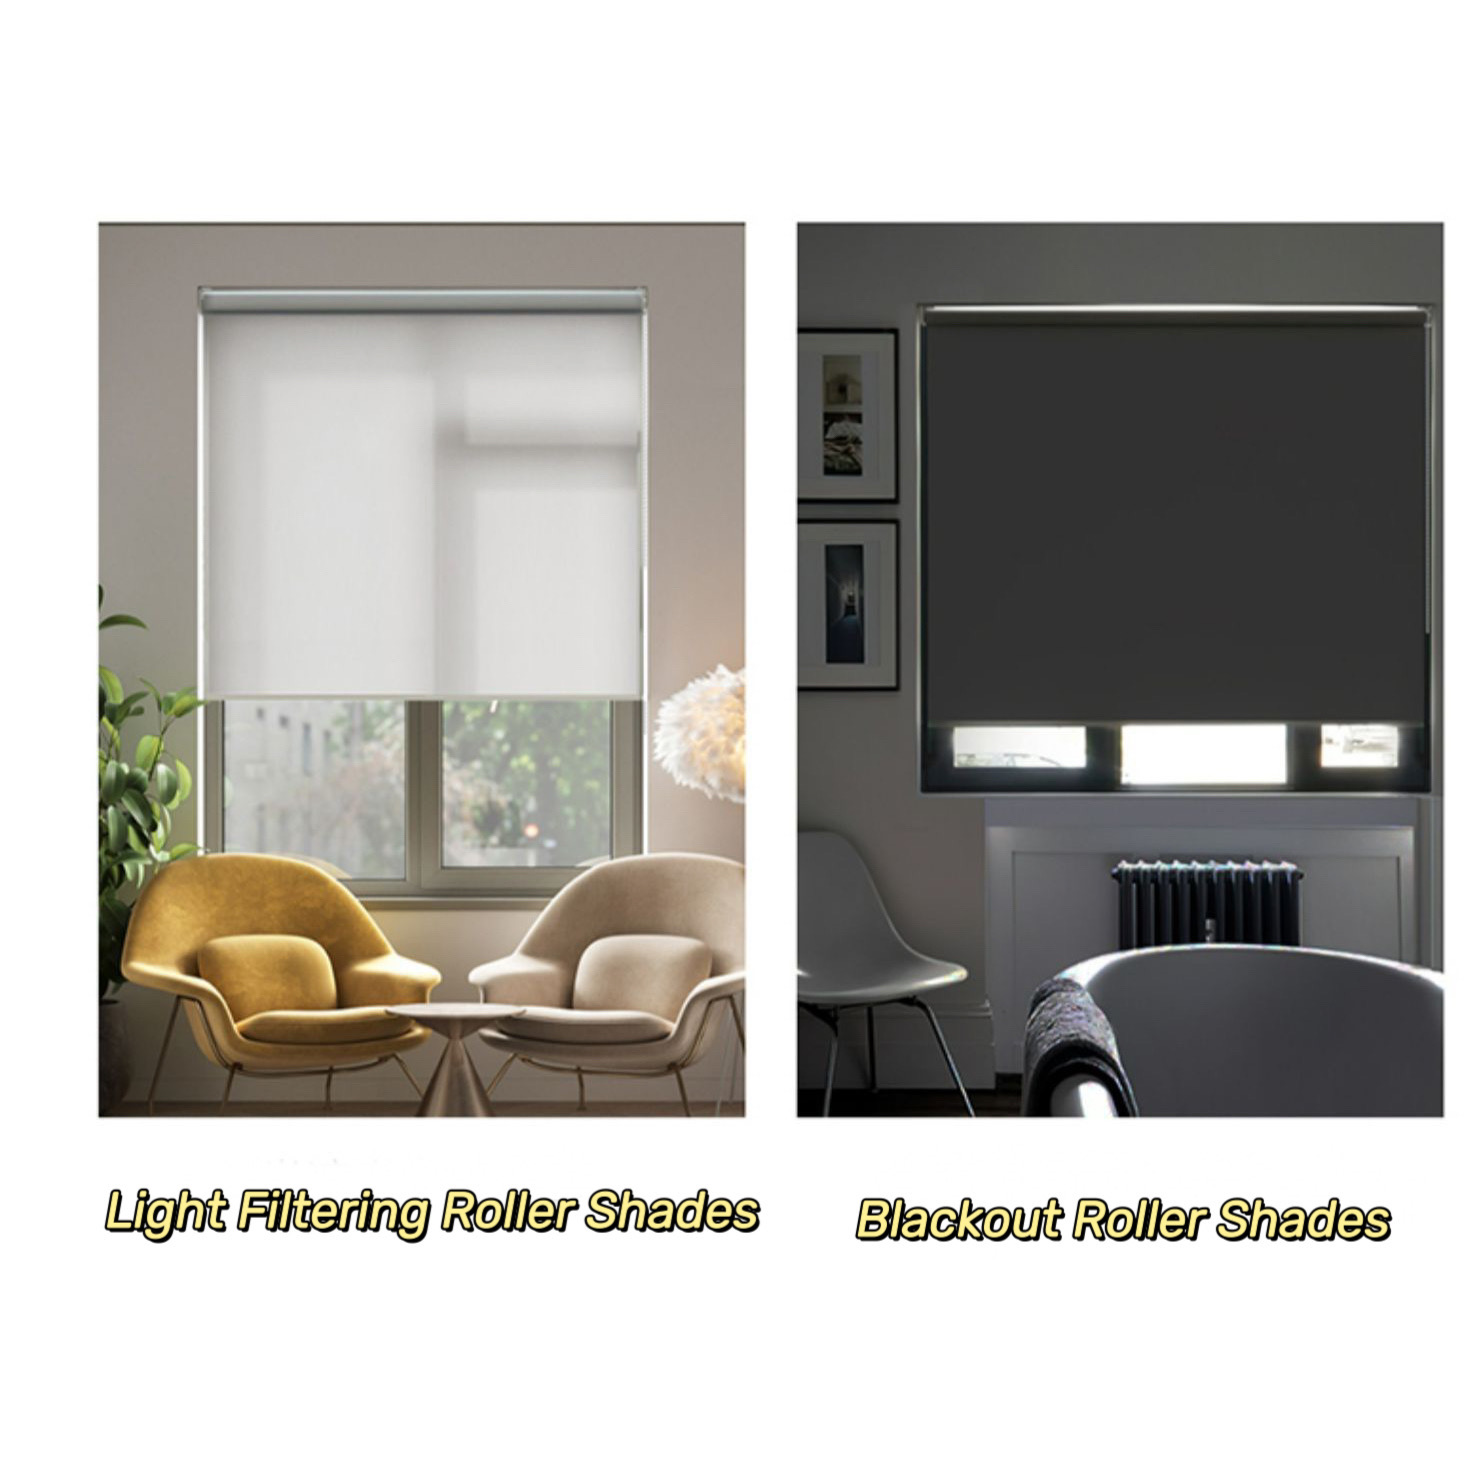 Indoor Blackout Roller Shades shading effect